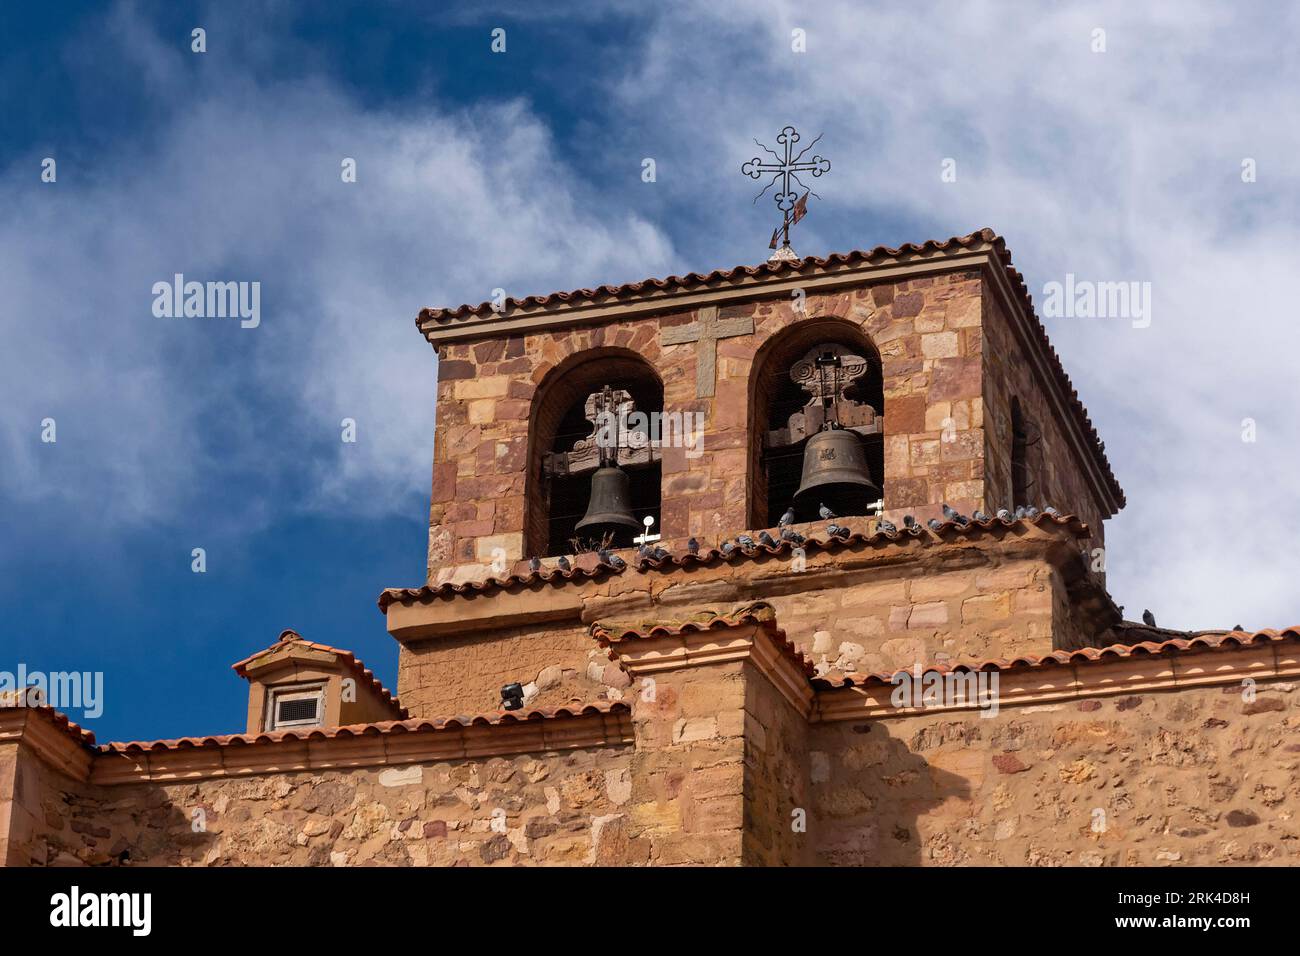 This stunning photograph captures the beauty and grandeur of the Campanario (bell tower) of the Iglesia de Nuestra Señora de la Asuncion in Borobia Stock Photo